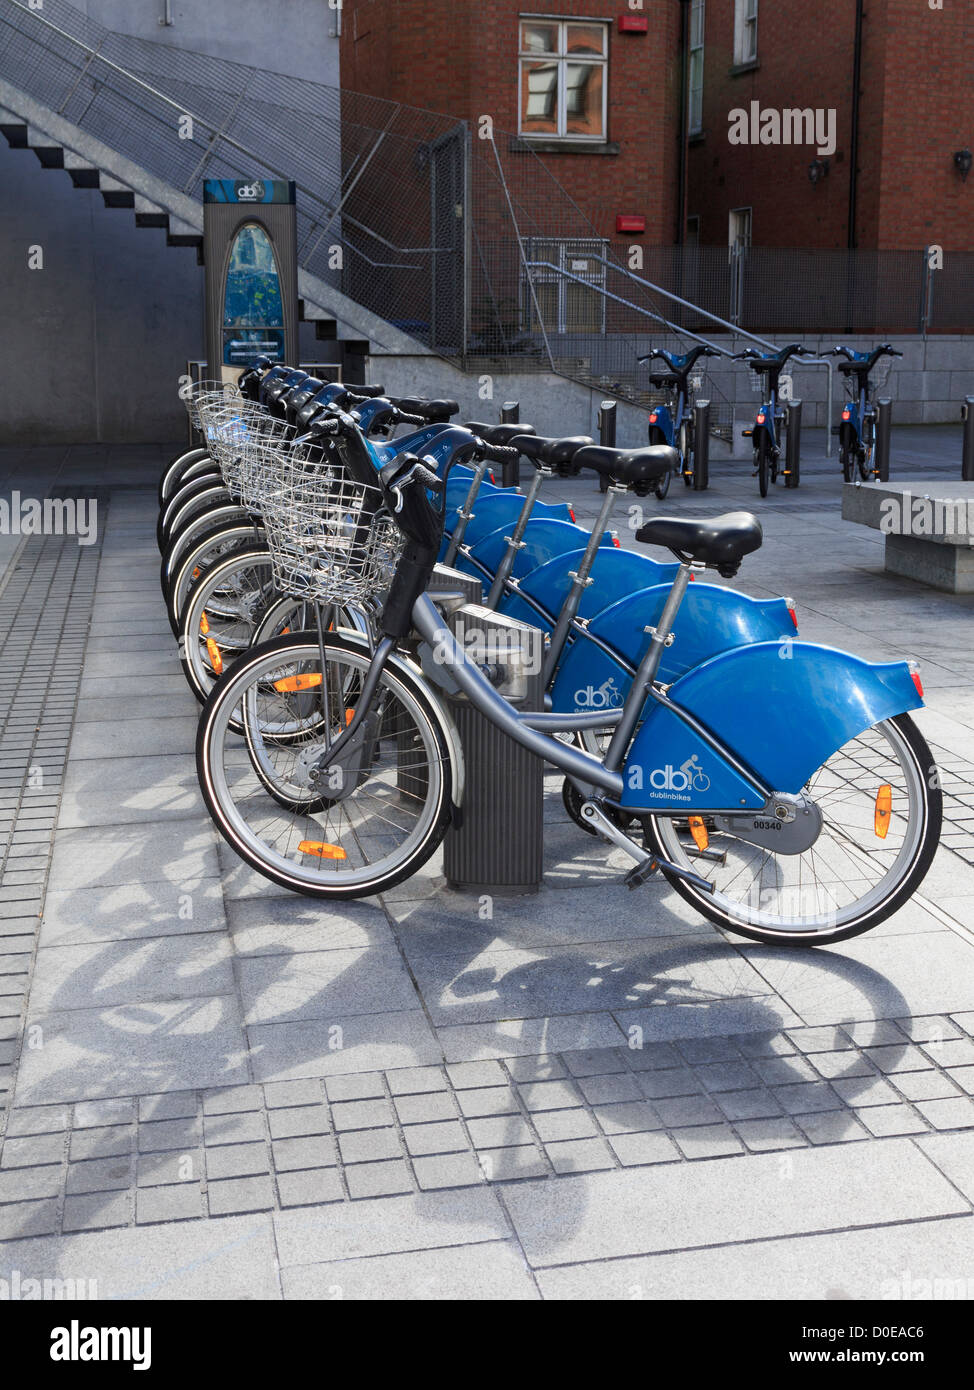 Dublinbikes public rental bikes parked up on stands in city cycling scheme station in Dublin city, Southern Ireland, Eire Stock Photo